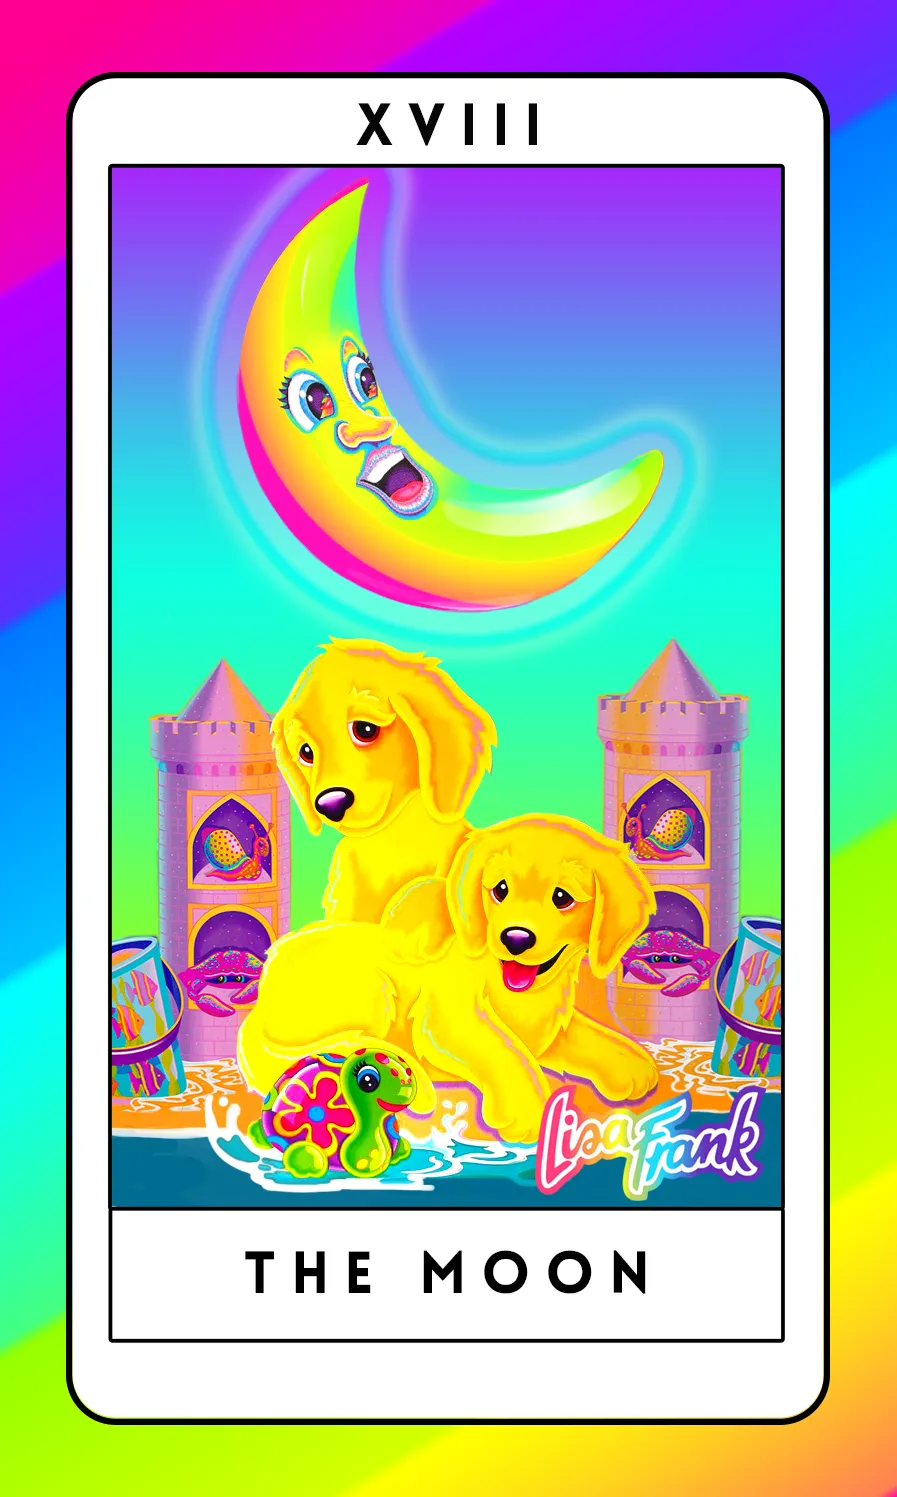 Drikke sig fuld tricky Seaside This Lisa Frank Tarot Deck Will Bring Out Your Inner Fifth-Grade Mystic |  HuffPost Entertainment